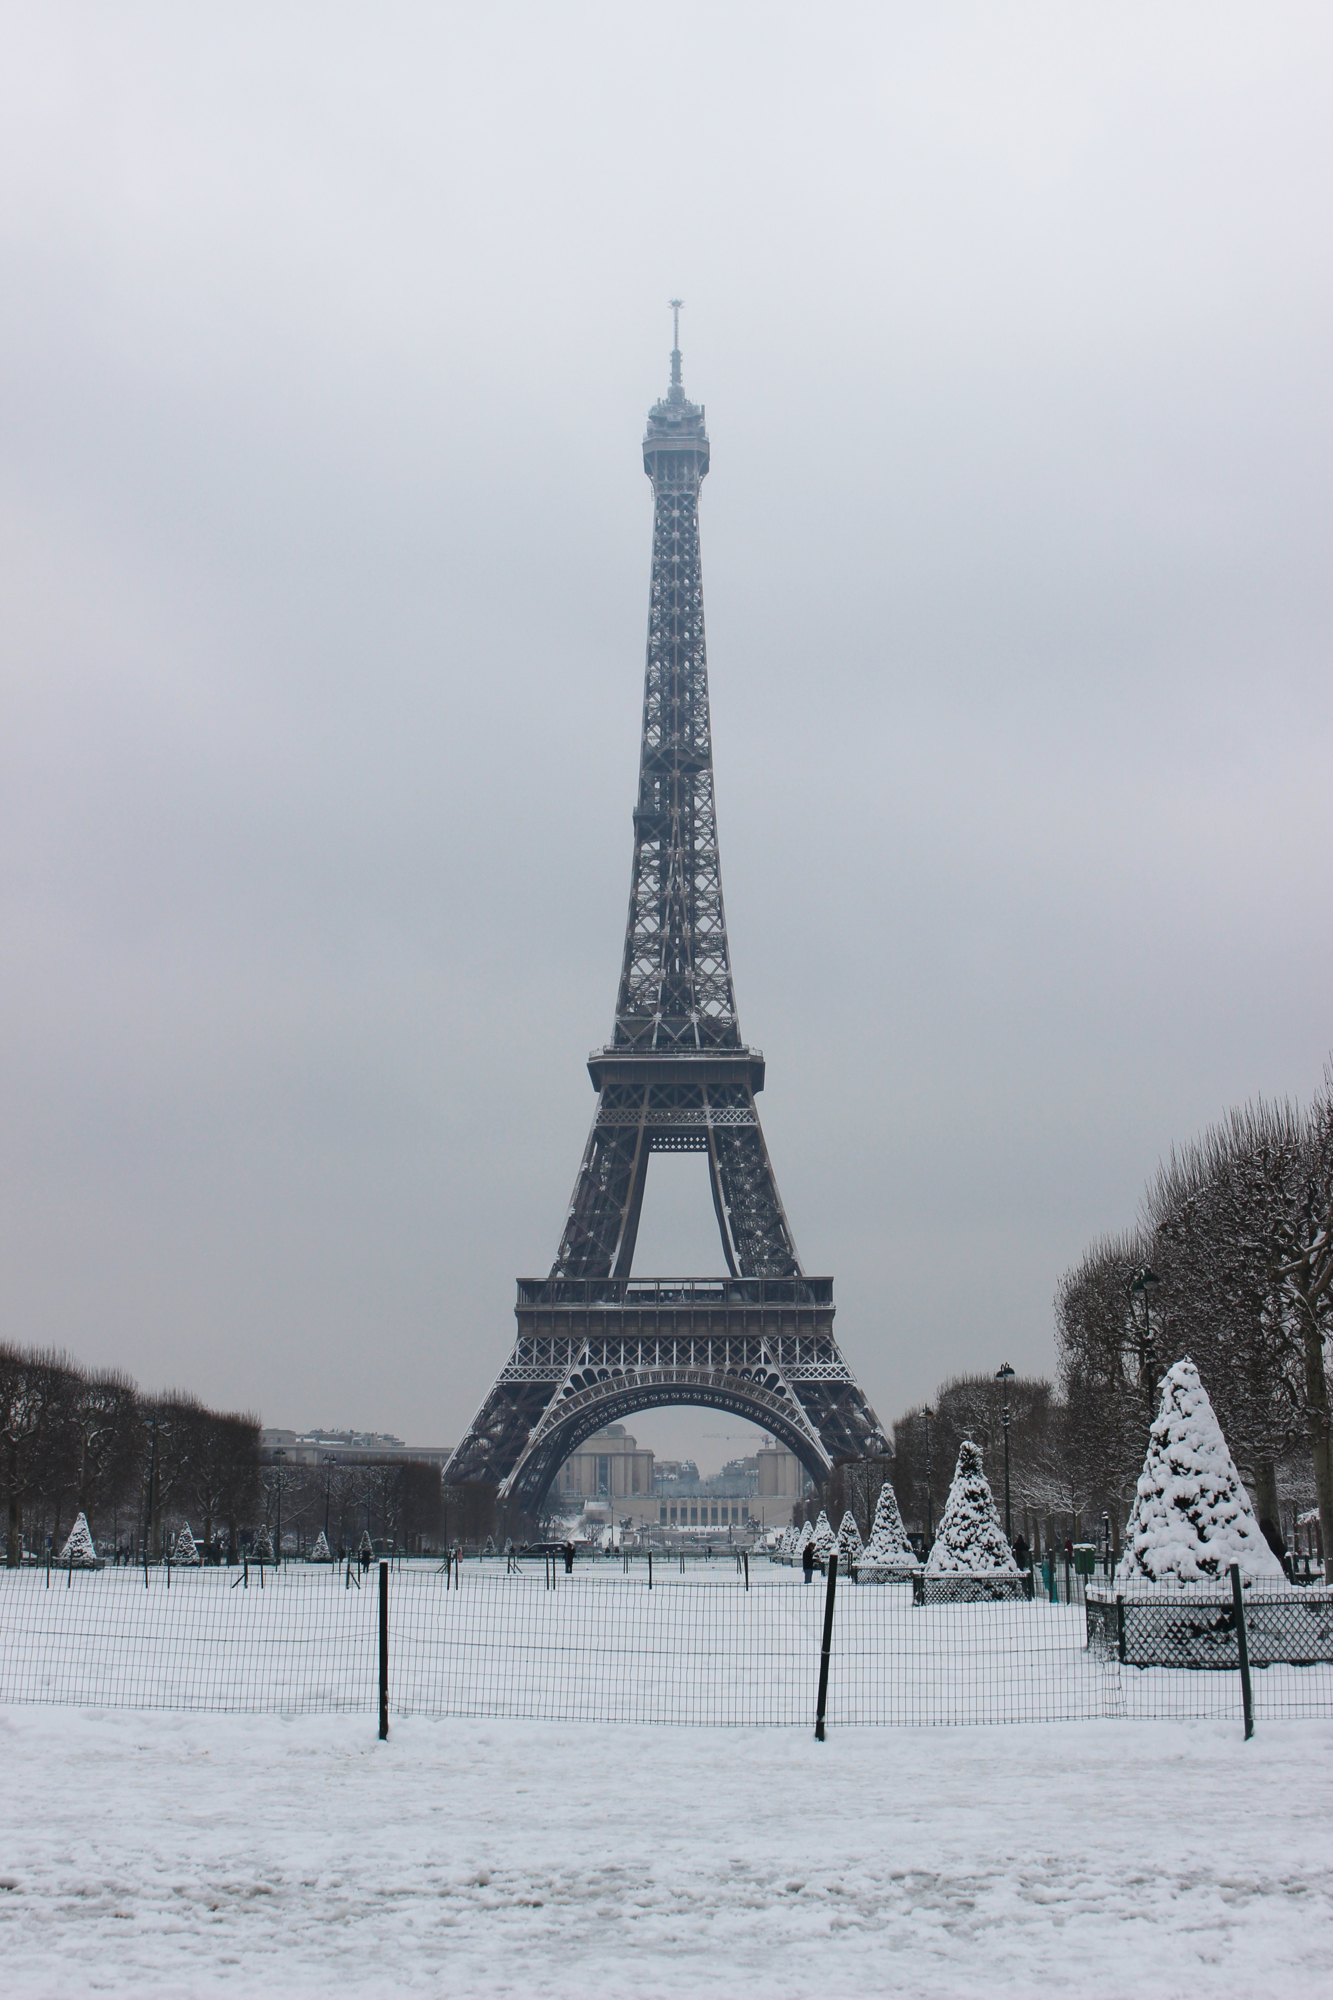 The Eiffel Tower stands tall amidst the snow the morning of Feb. 6. Photo by Jarleene Almenas